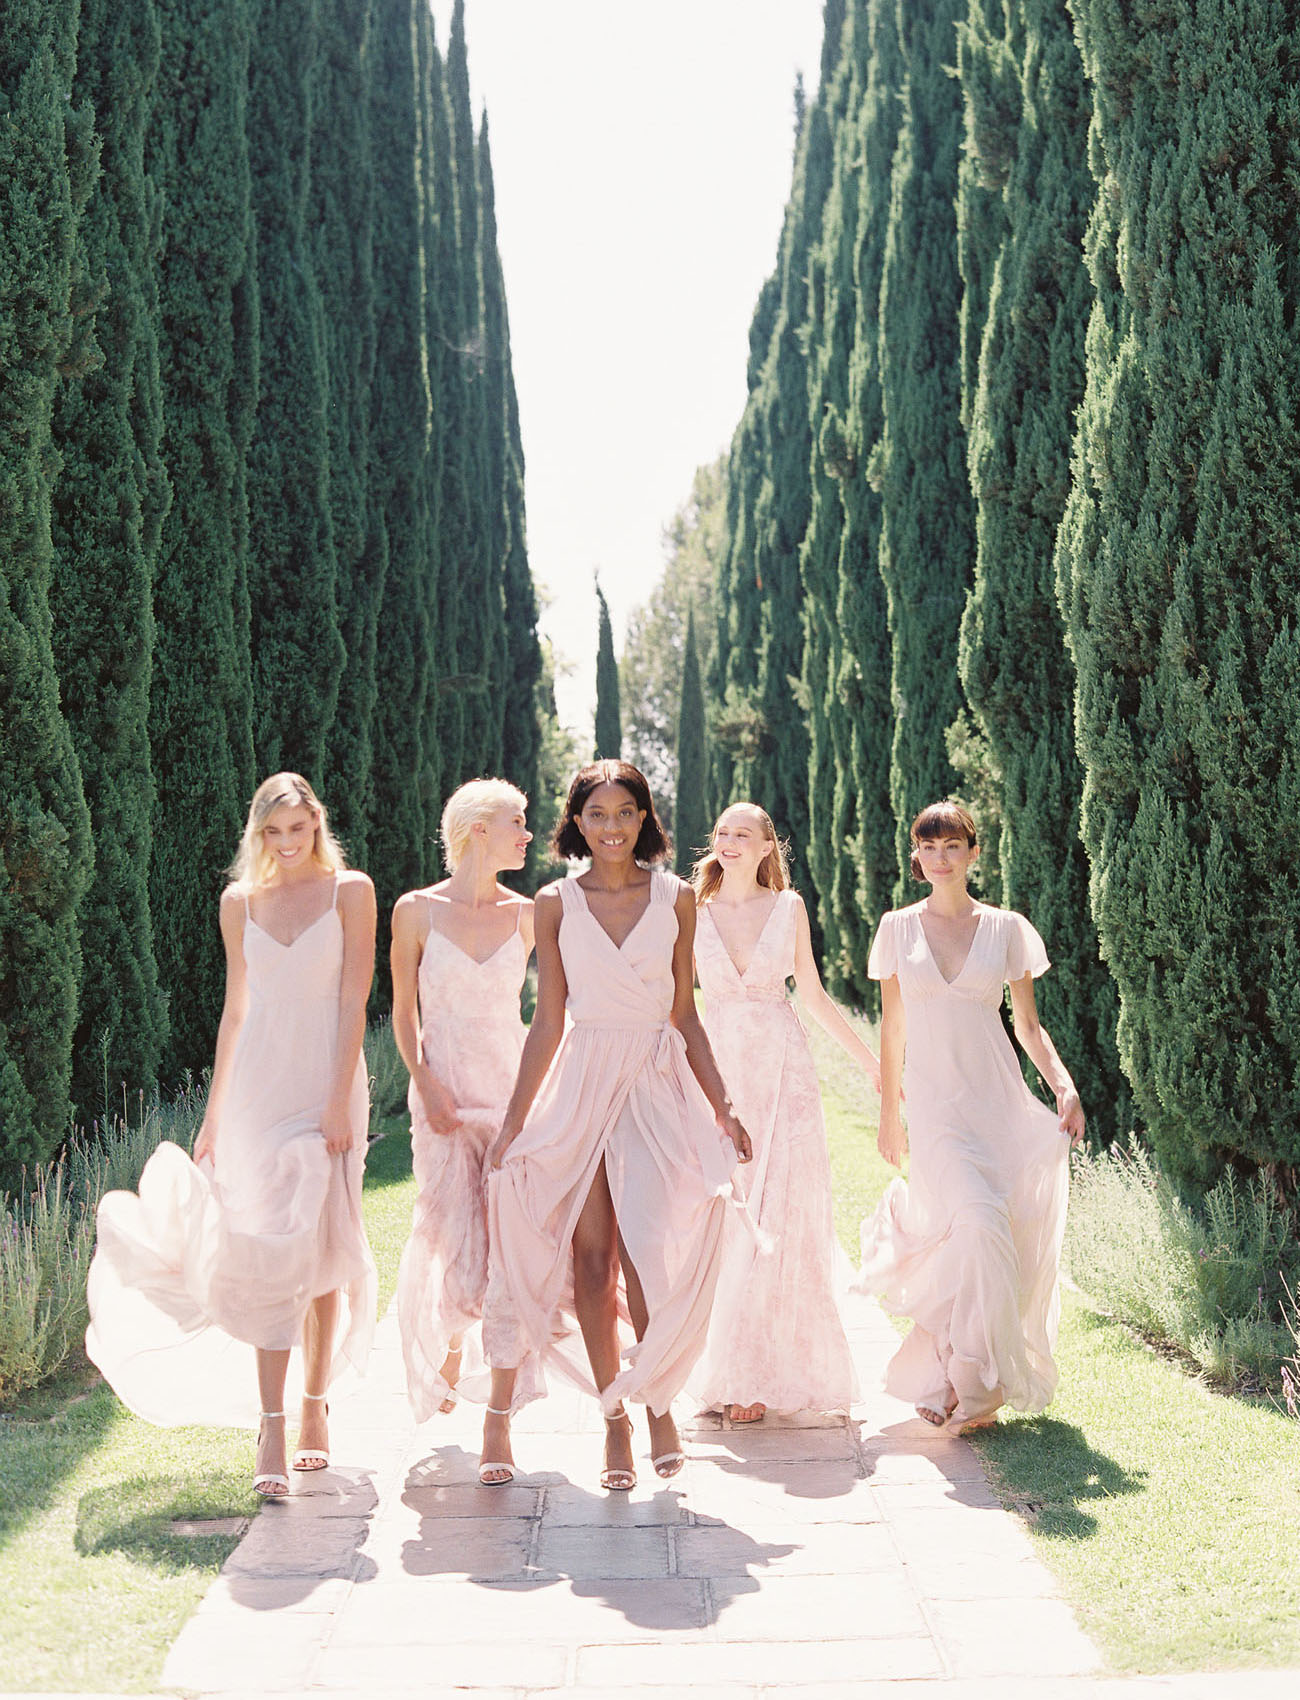 Joanna August?s New Additions for Bridesmaids + Brides That Won?t Break the Bank